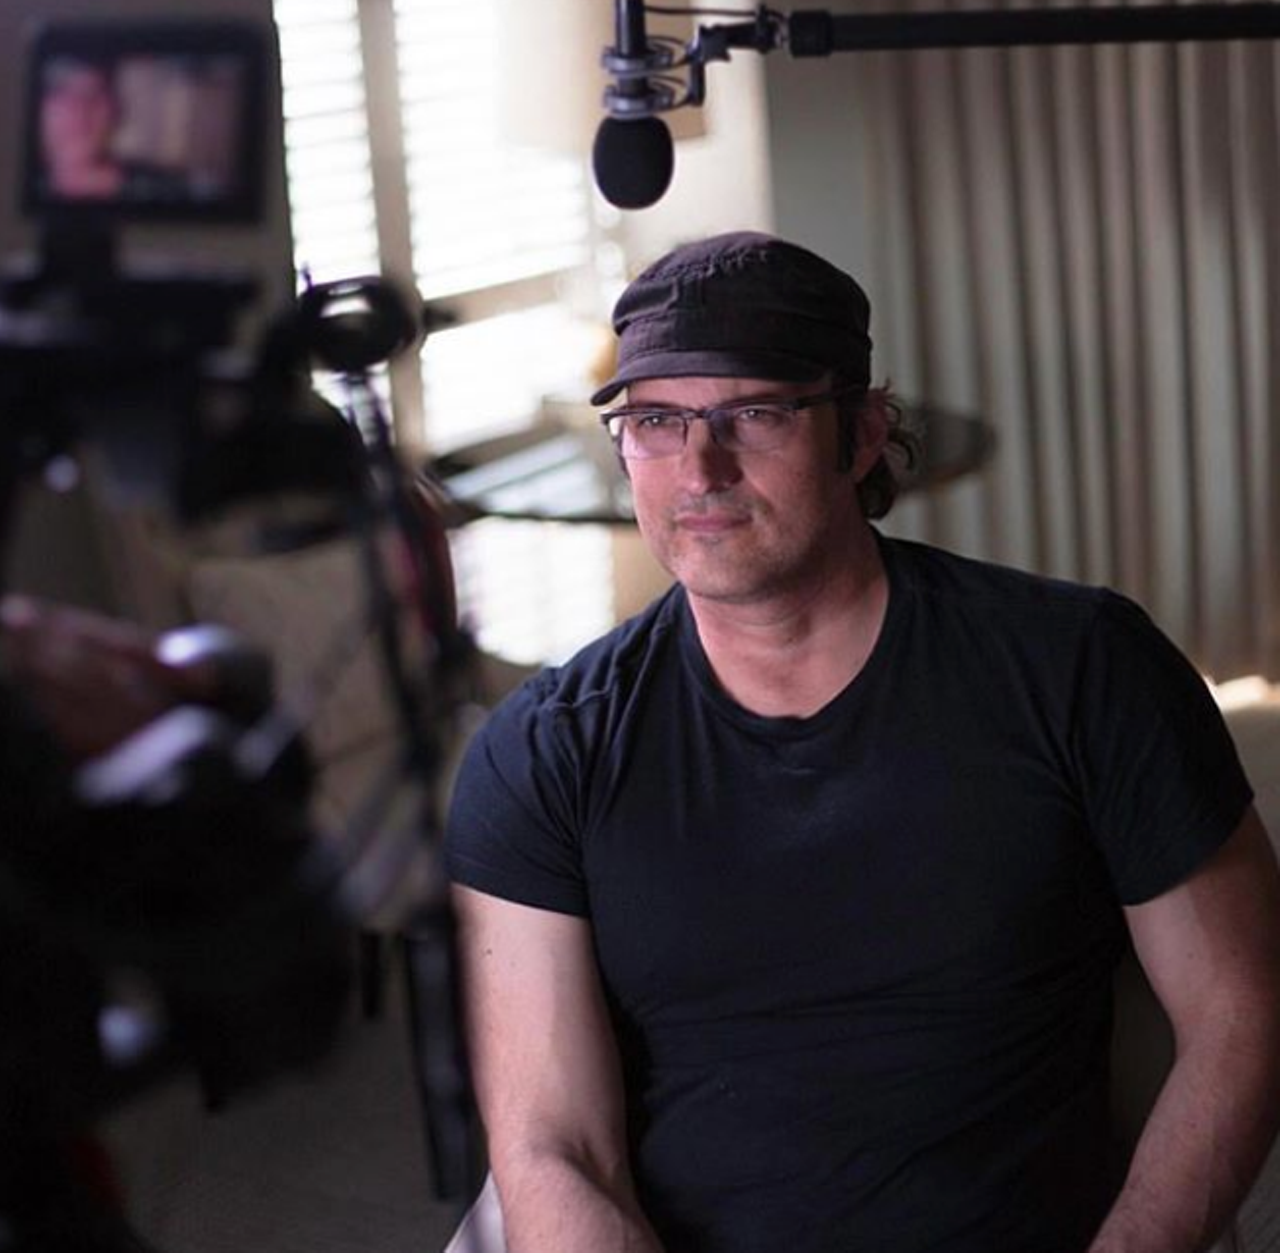 Robert Rodriguez
Badass director (Sin City, Once Upon a Time in Mexico, Machete, Spy Kids, From Dusk Till Dawn, El Mariachi) Robert Rodriguez can be considered SA’s pride and joy, or at least for movie junkies. He was born here in 1968 and graduated from St. Anthony HS – though he definitely reps Austin nowadays.
Photo via Instagram / rodriguez